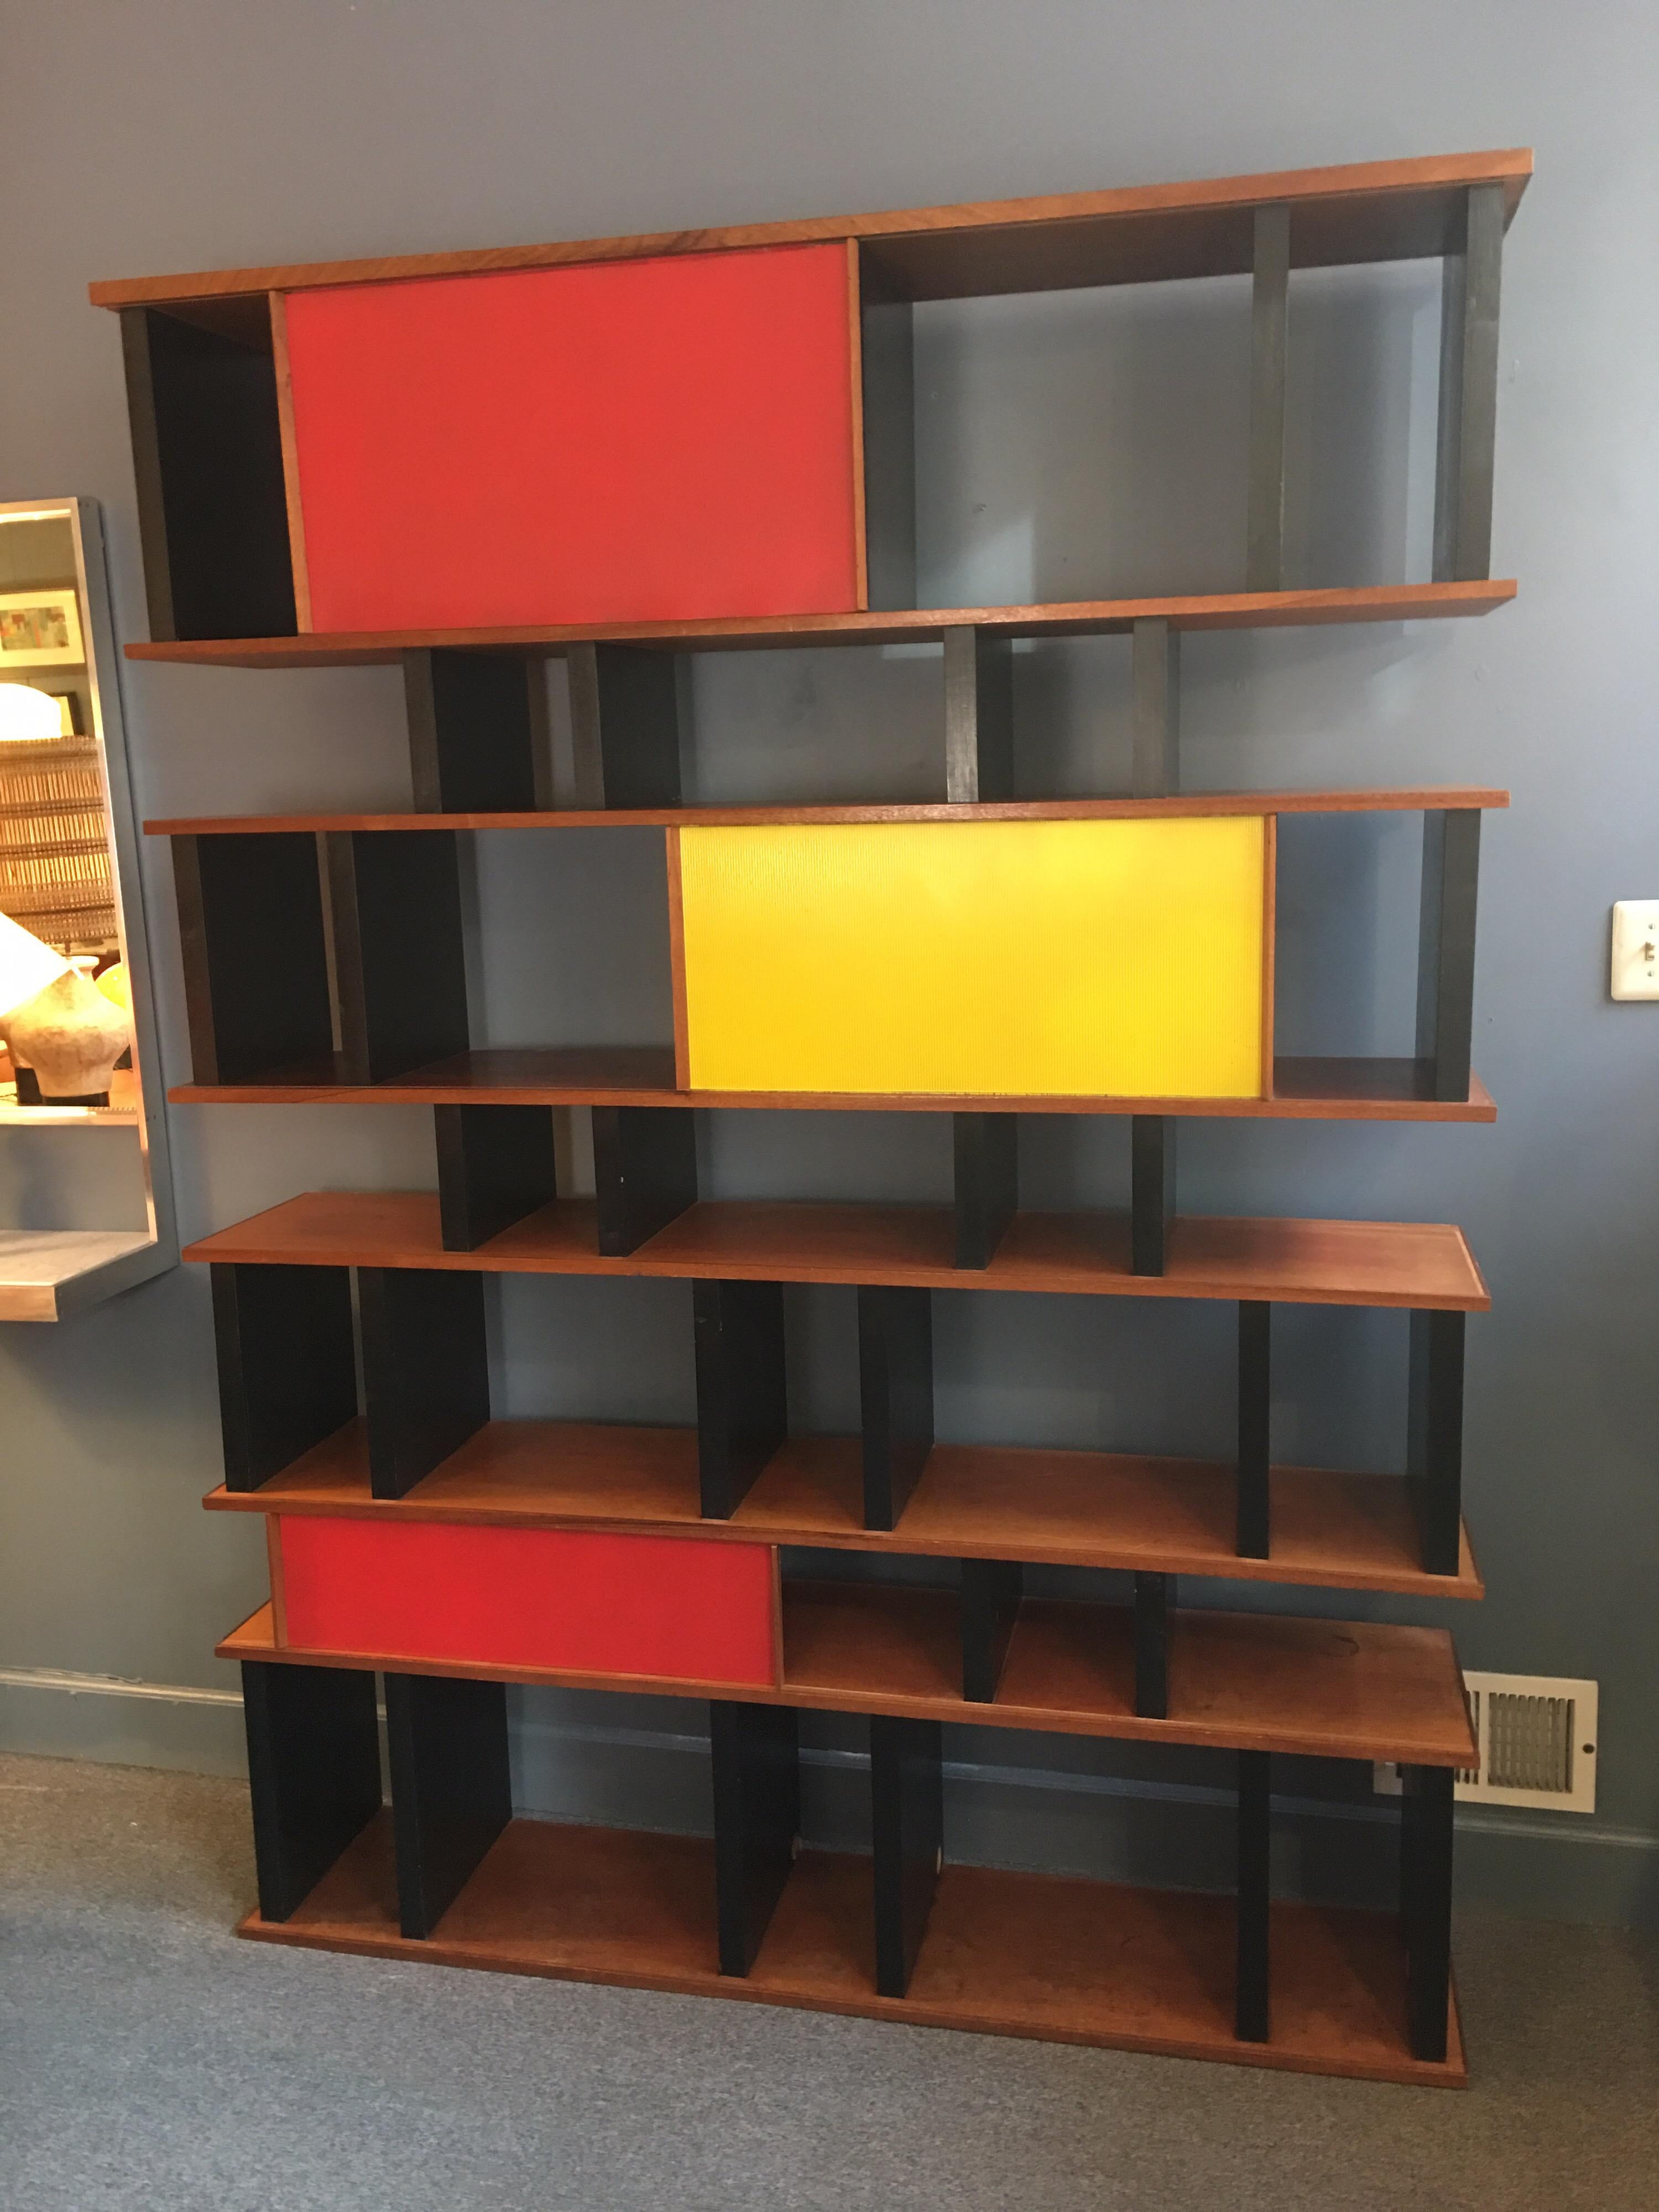 Perriand and Prouve style shelving system custom built for an East Village Bar in, circa 1999. Sliding doors move back and forth and can be left in multiple spots to conceal content. Bright door panels in yellow and red. Can hold an entire Library